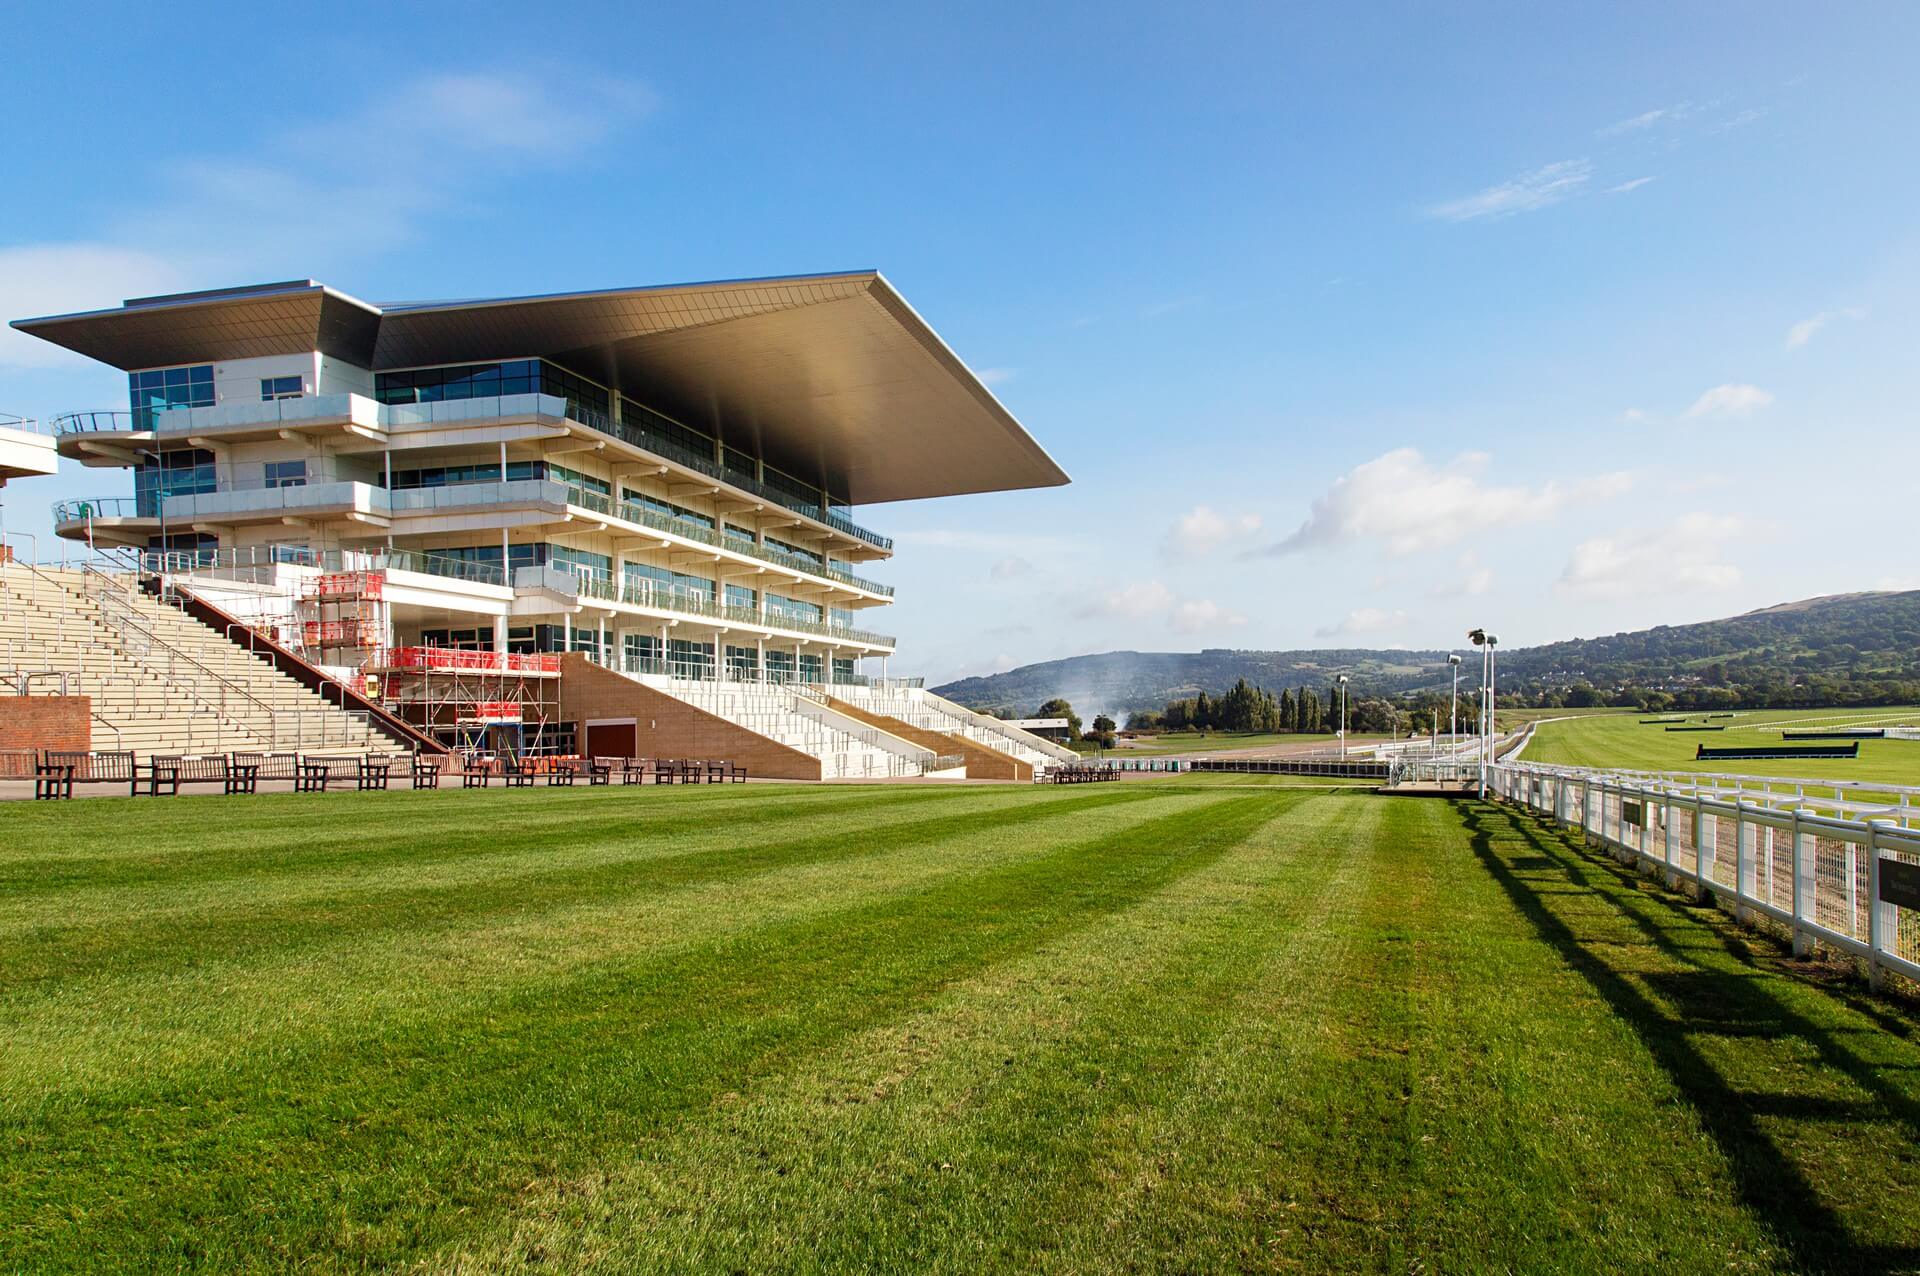 Cheltenham, UK The stands overlooking Cheltenham Racecourse located at Prestbury Park. The first organised Flat race meeting in Cheltenham took place in 1815 on Nottingham Hill.
